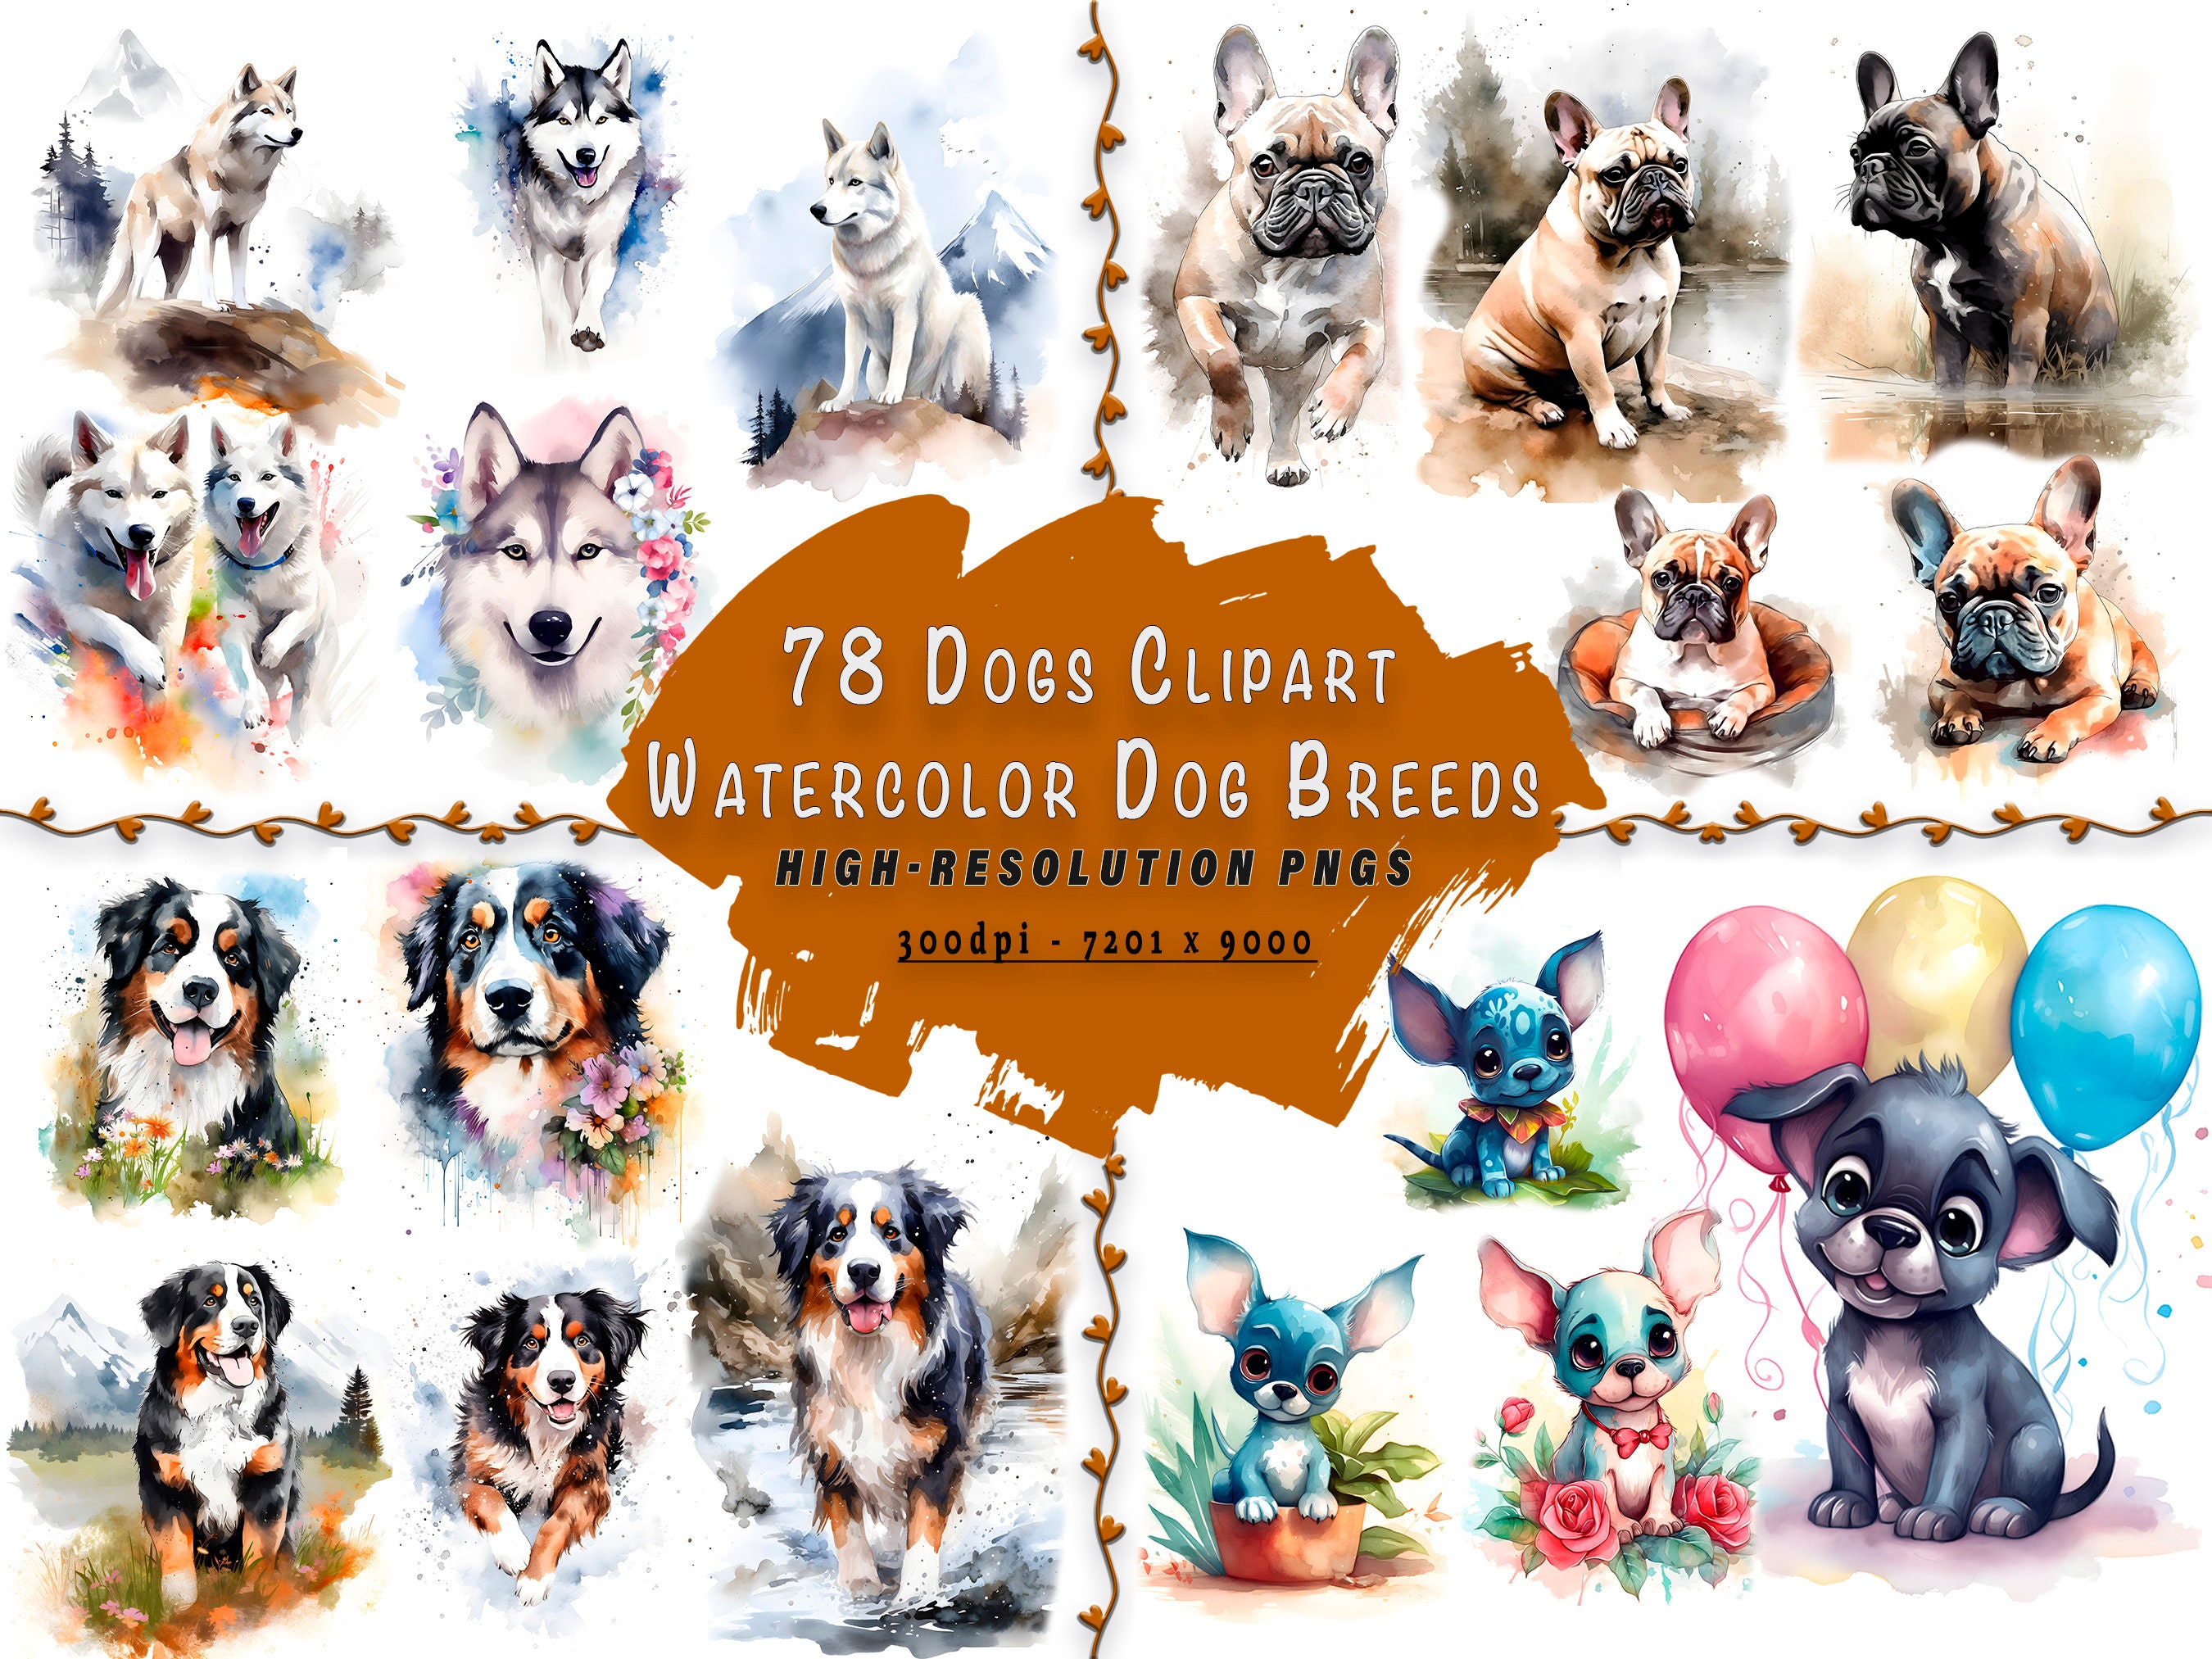 Big Dog Breeds Watercolor Clipart Set. Dog Lovers Gift Instant 